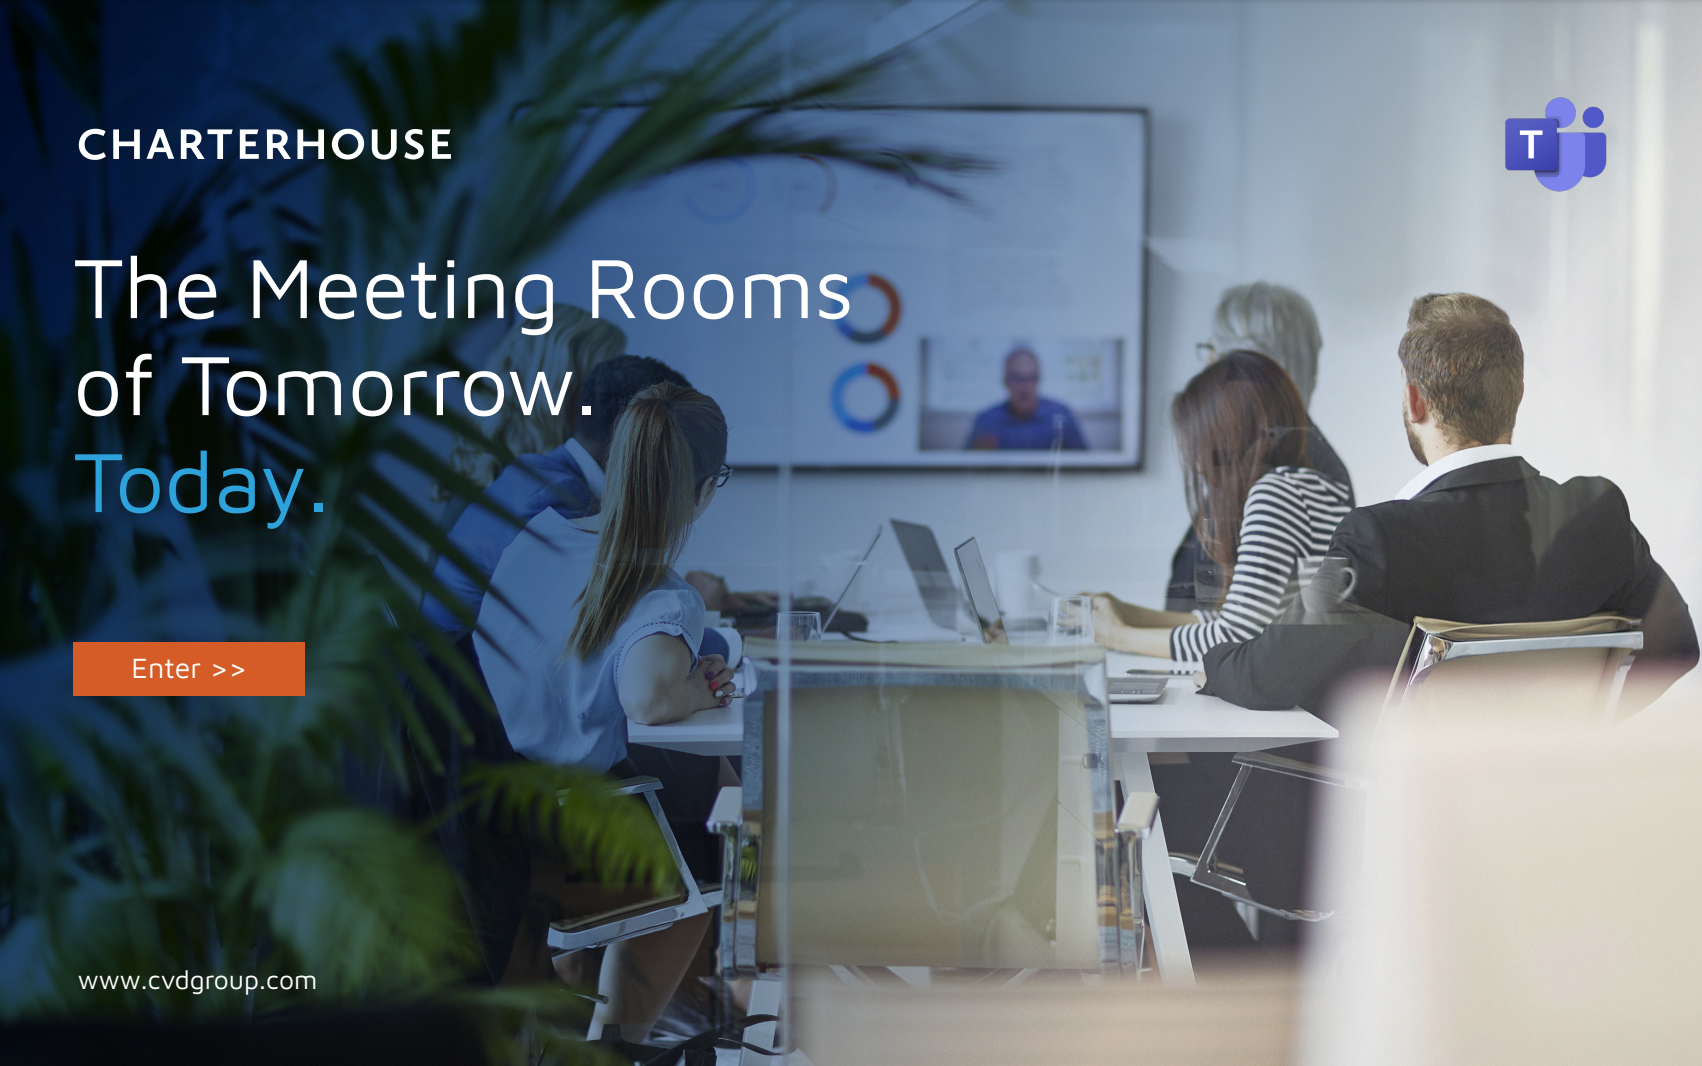 The meeting room of tomorrow - today